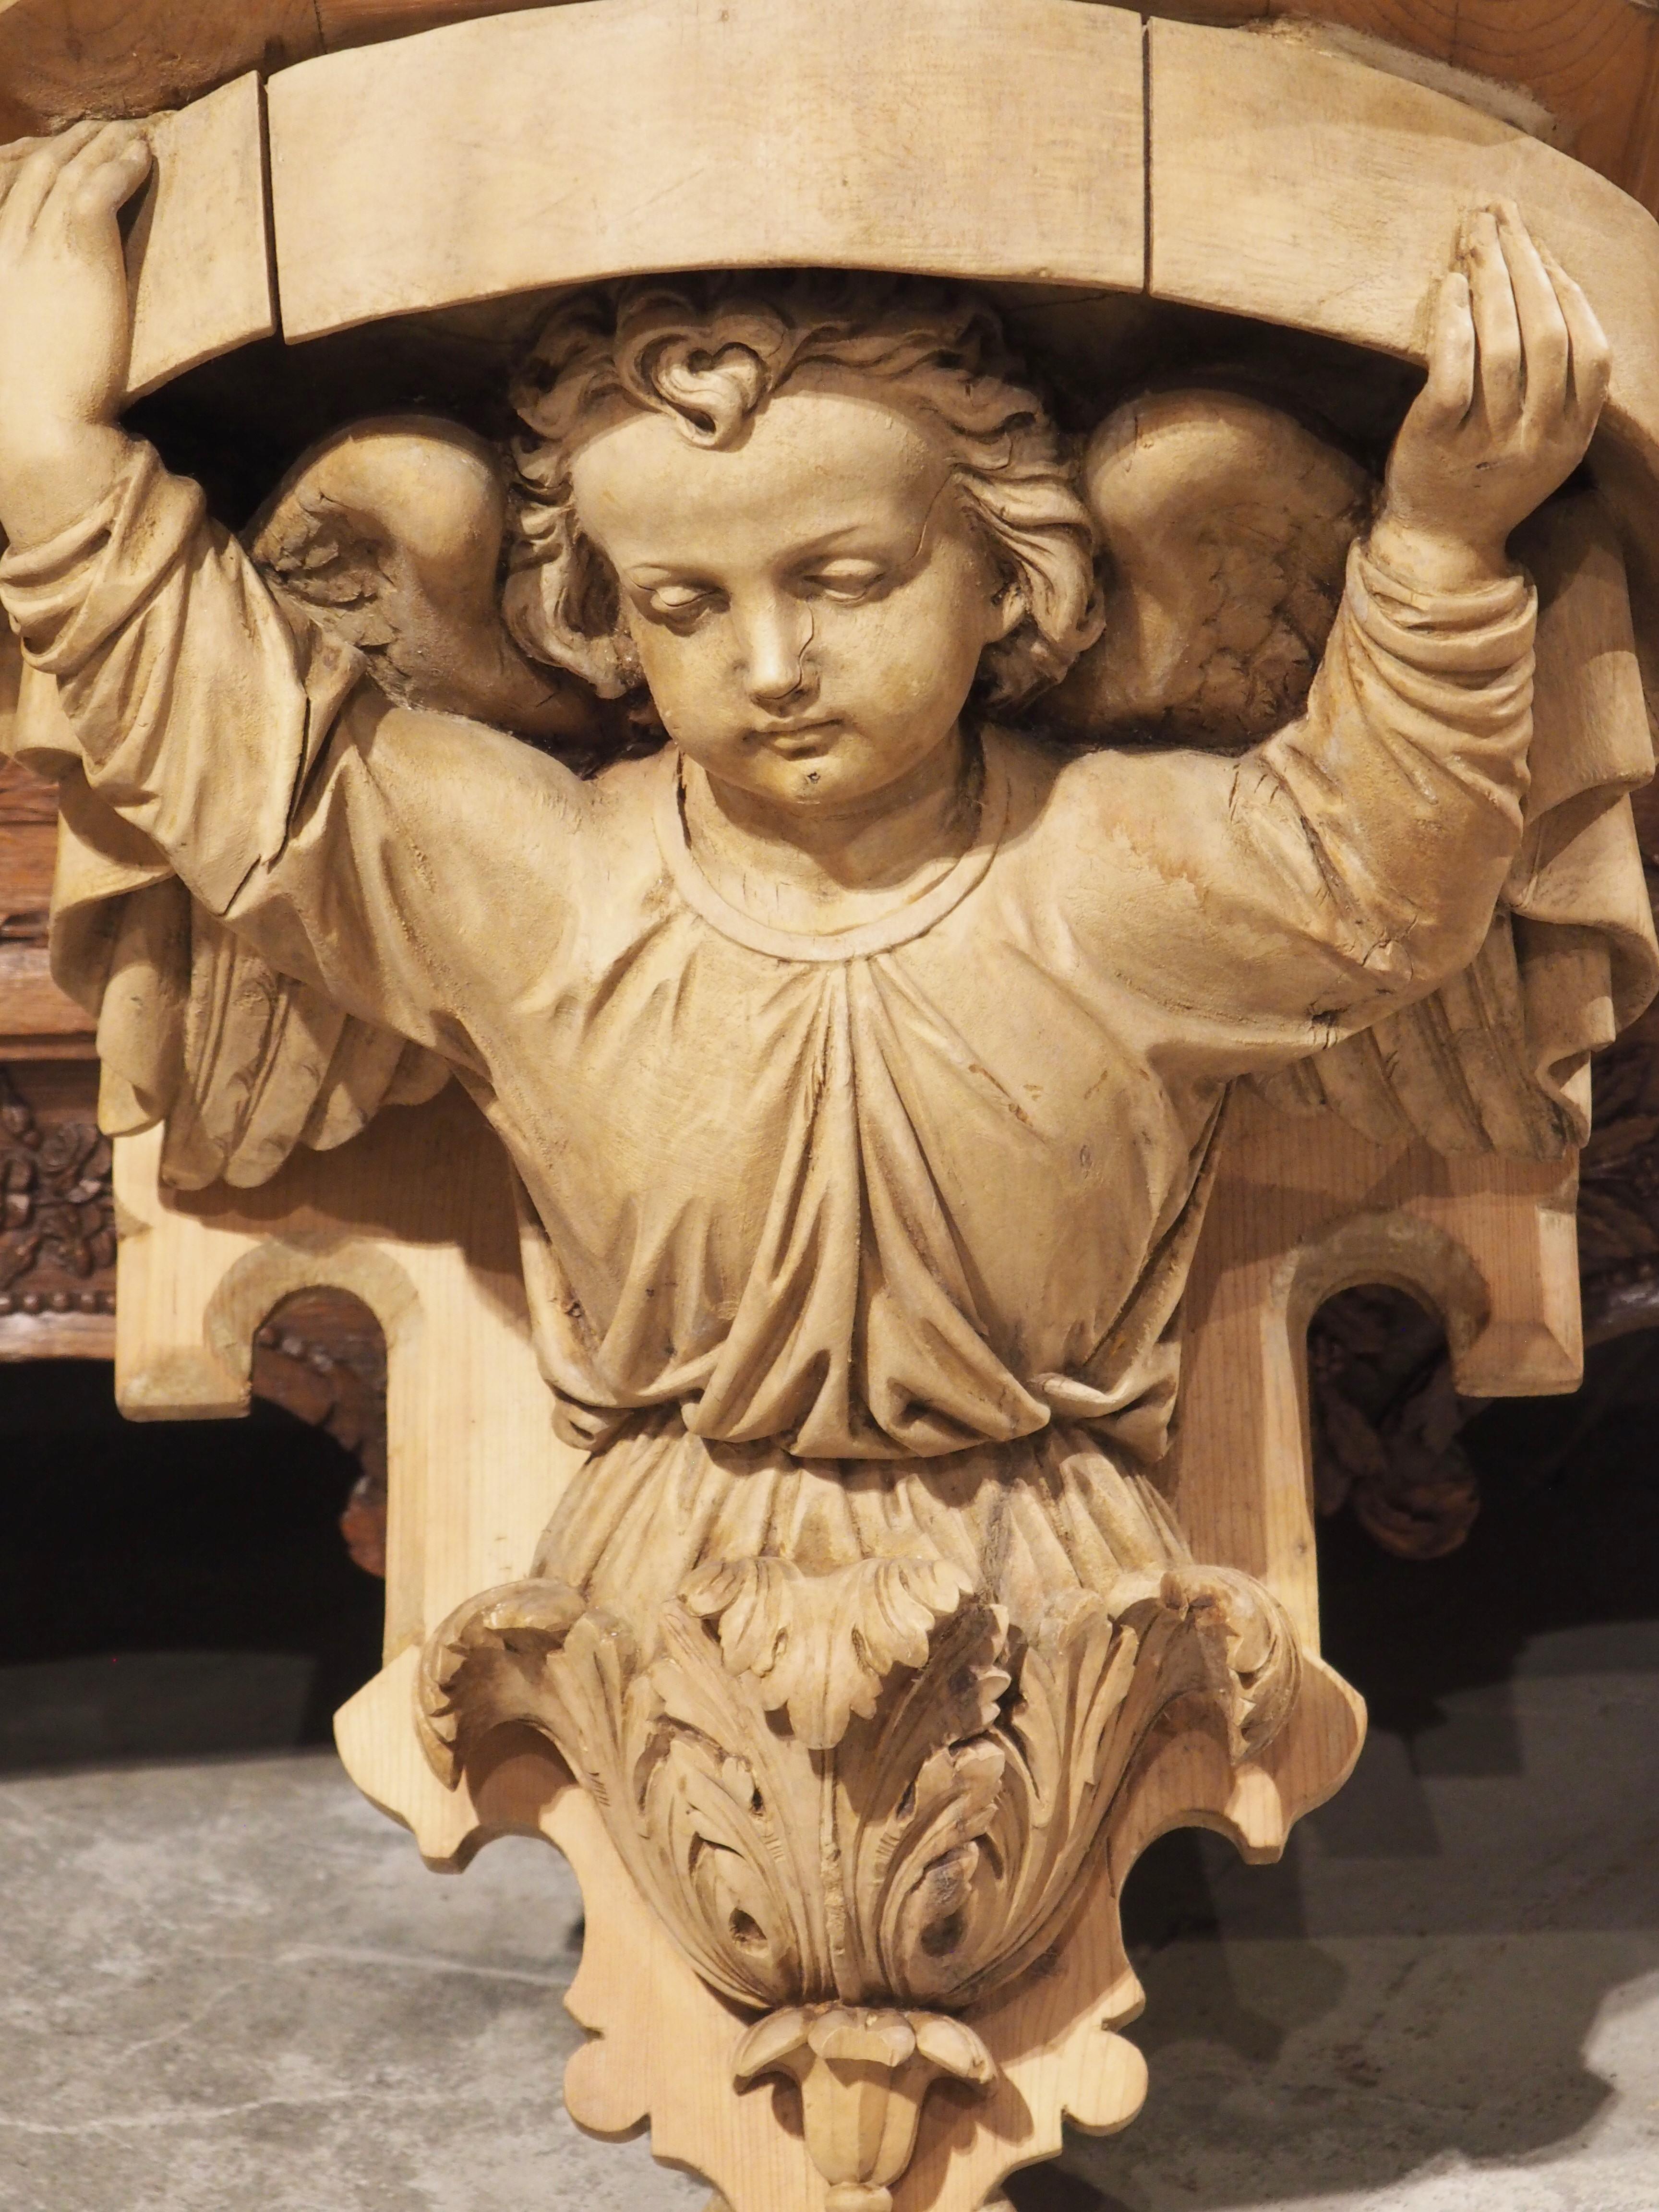 Hand-carved in France, circa 1880, this wooden bracket console features a wonderfully executed winged angel beneath an angular entablature. The innocent visage of the cherub is augmented by the downward gaze, as he supports an arched molding above